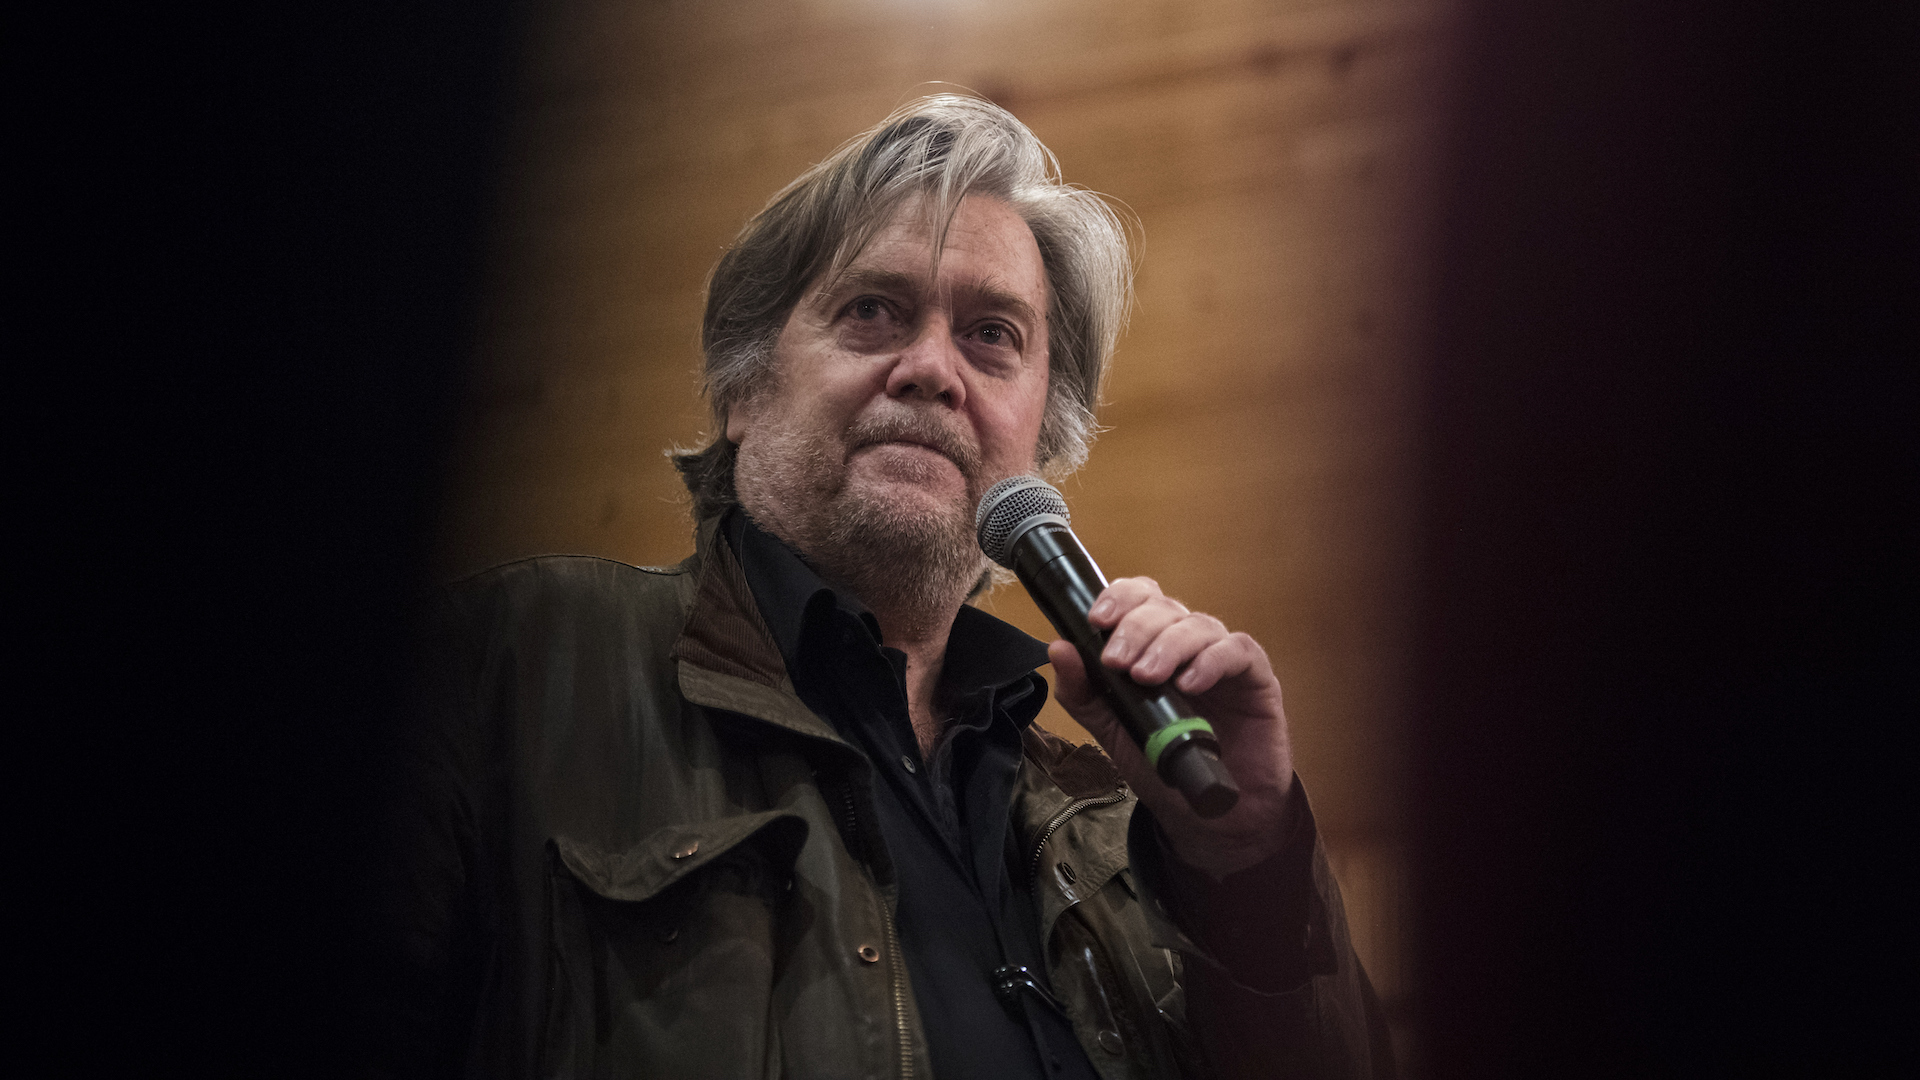 Former White House strategist Steve Bannon speaks at a campaign event for Senate candidate Senate candidate Roy Moore in Midland City, Alabama on Dec. 11, 2017. (Jabin Botsford—The Washington Post/Getty Images)